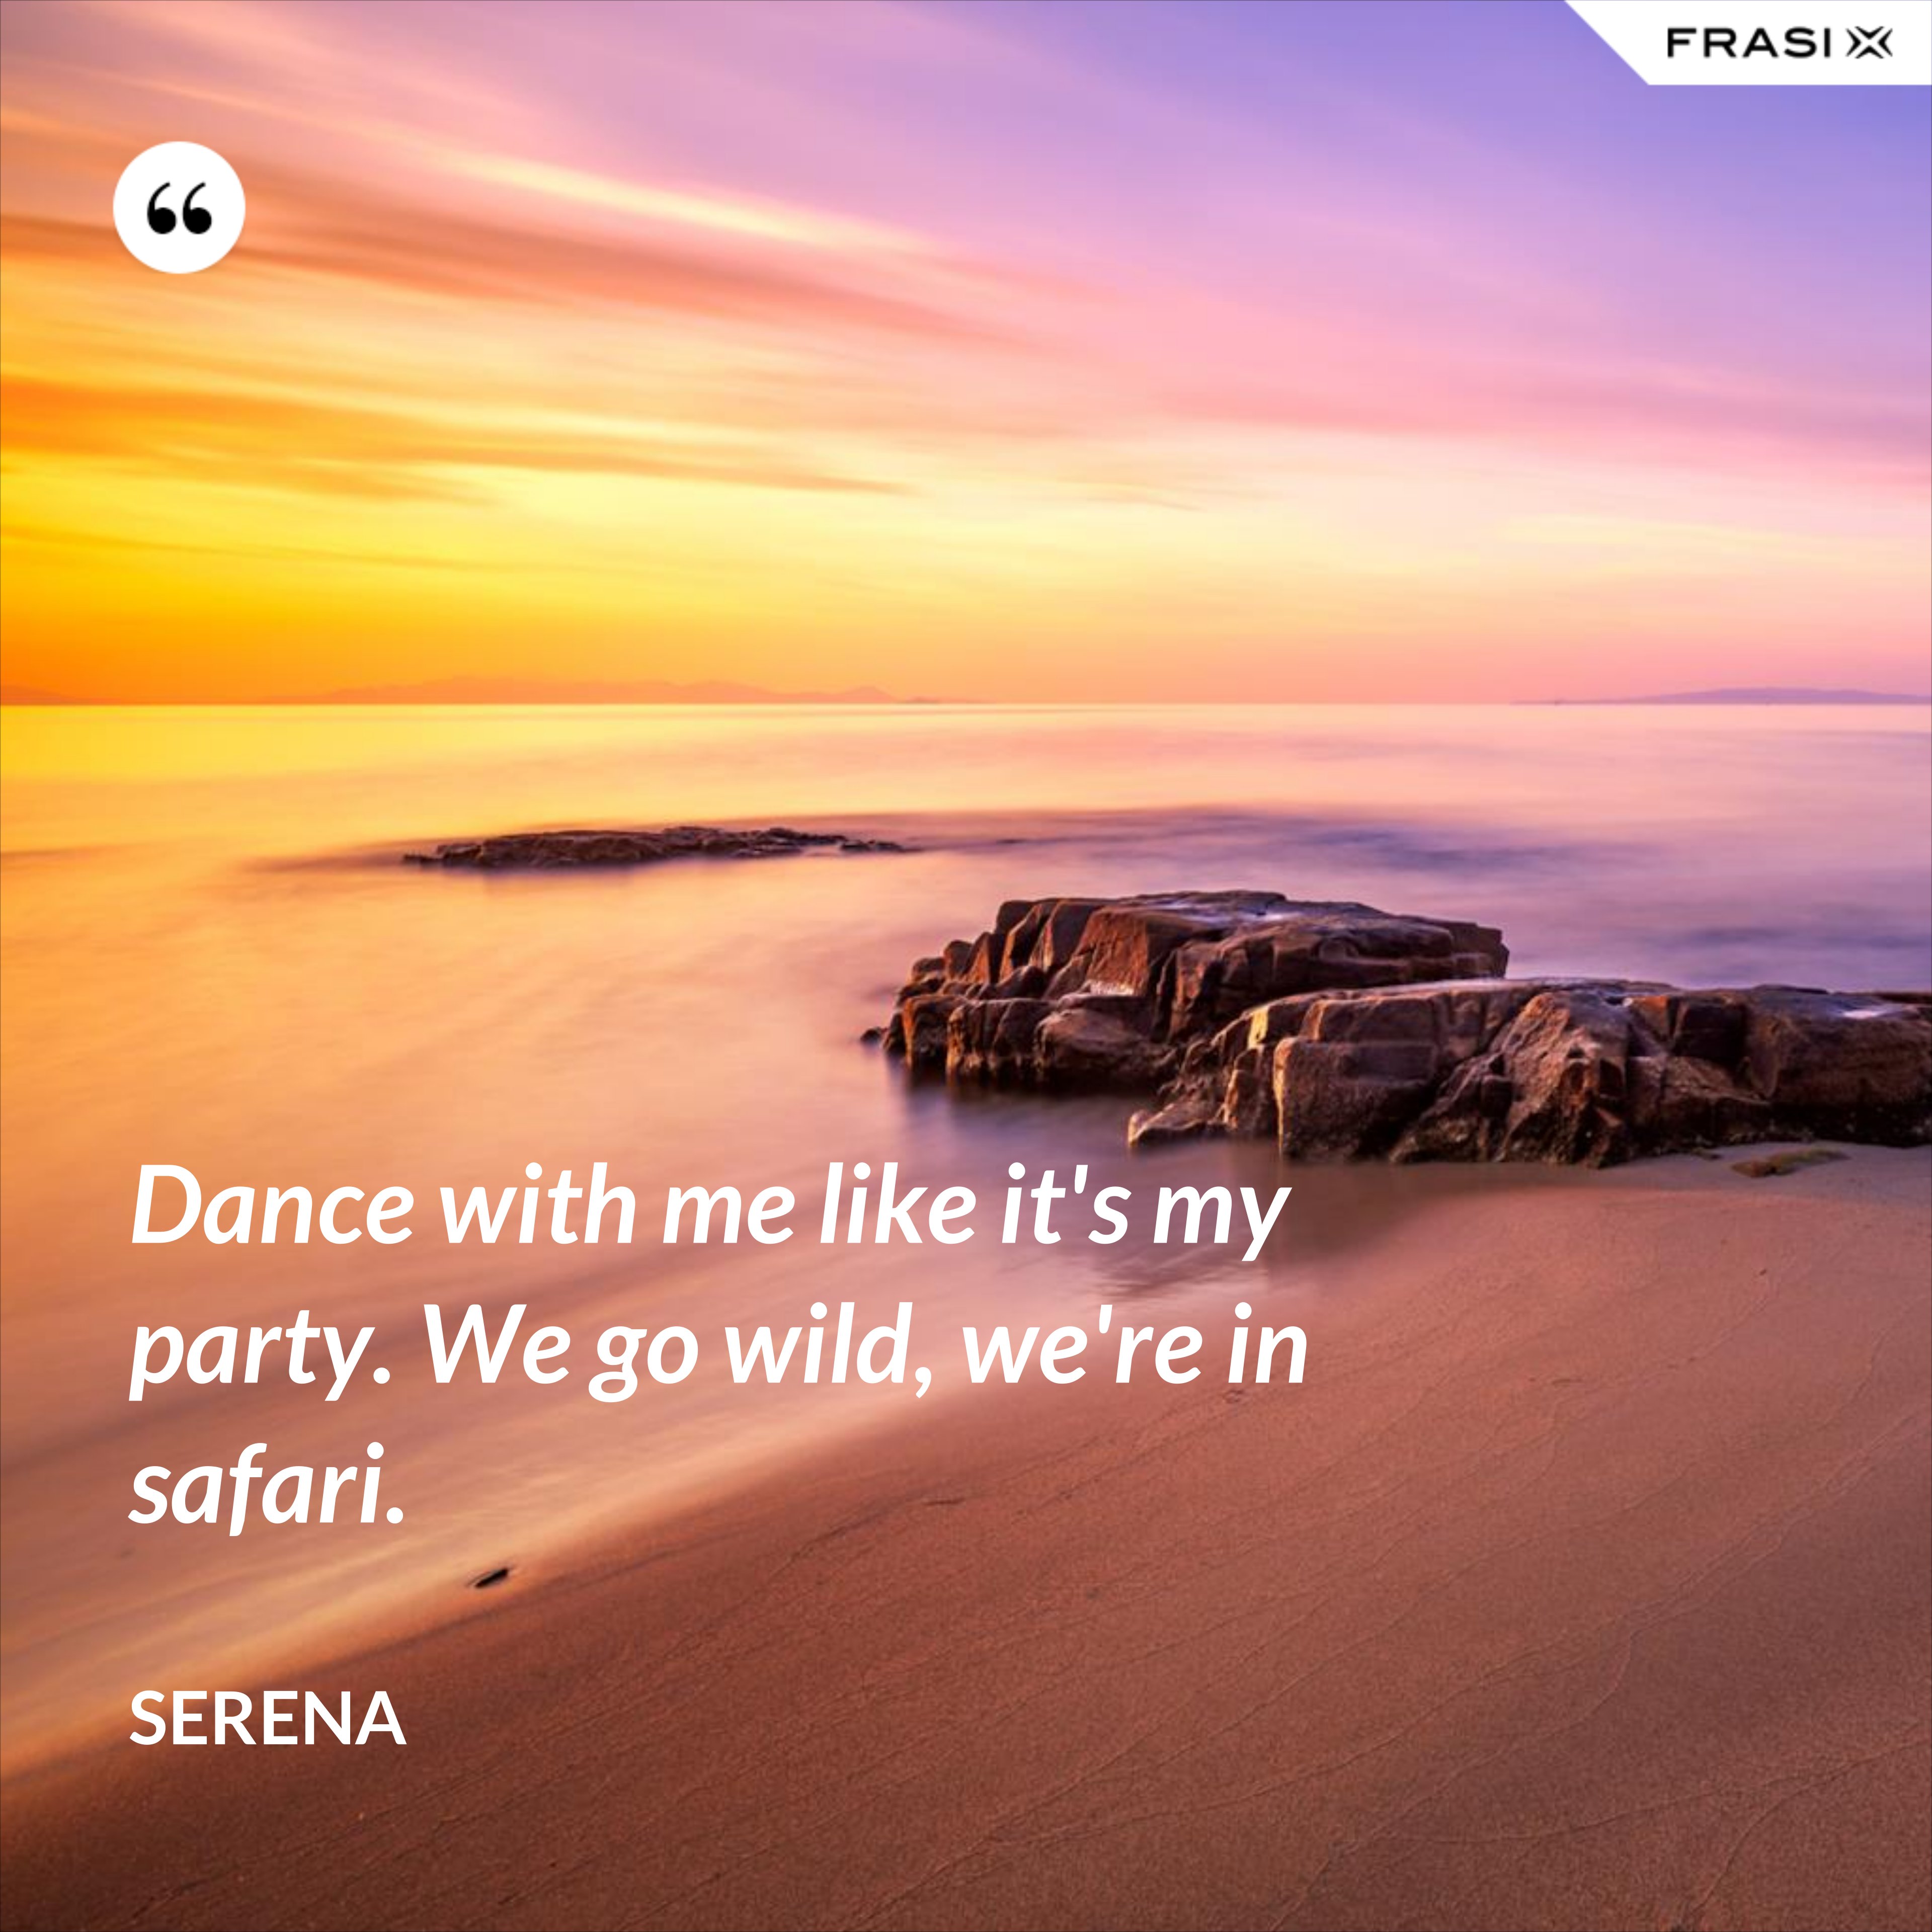 Dance with me like it's my party. We go wild, we're in safari. - Serena